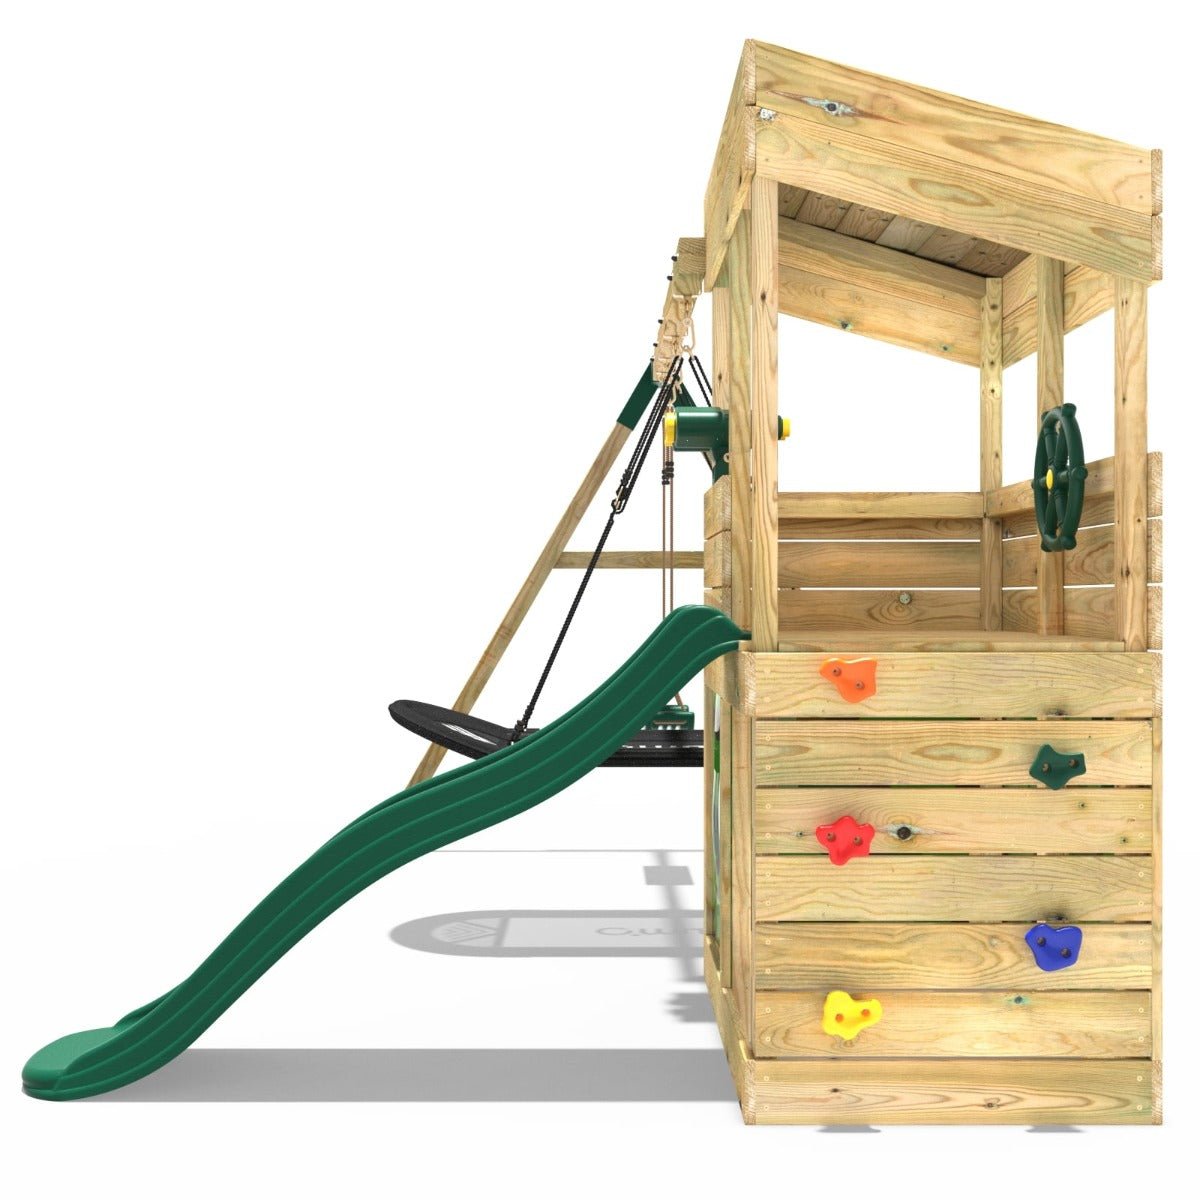 Rebo Wooden Lookout Tower Playhouse with 6ft Slide & Swing - Yosemite Camouflage